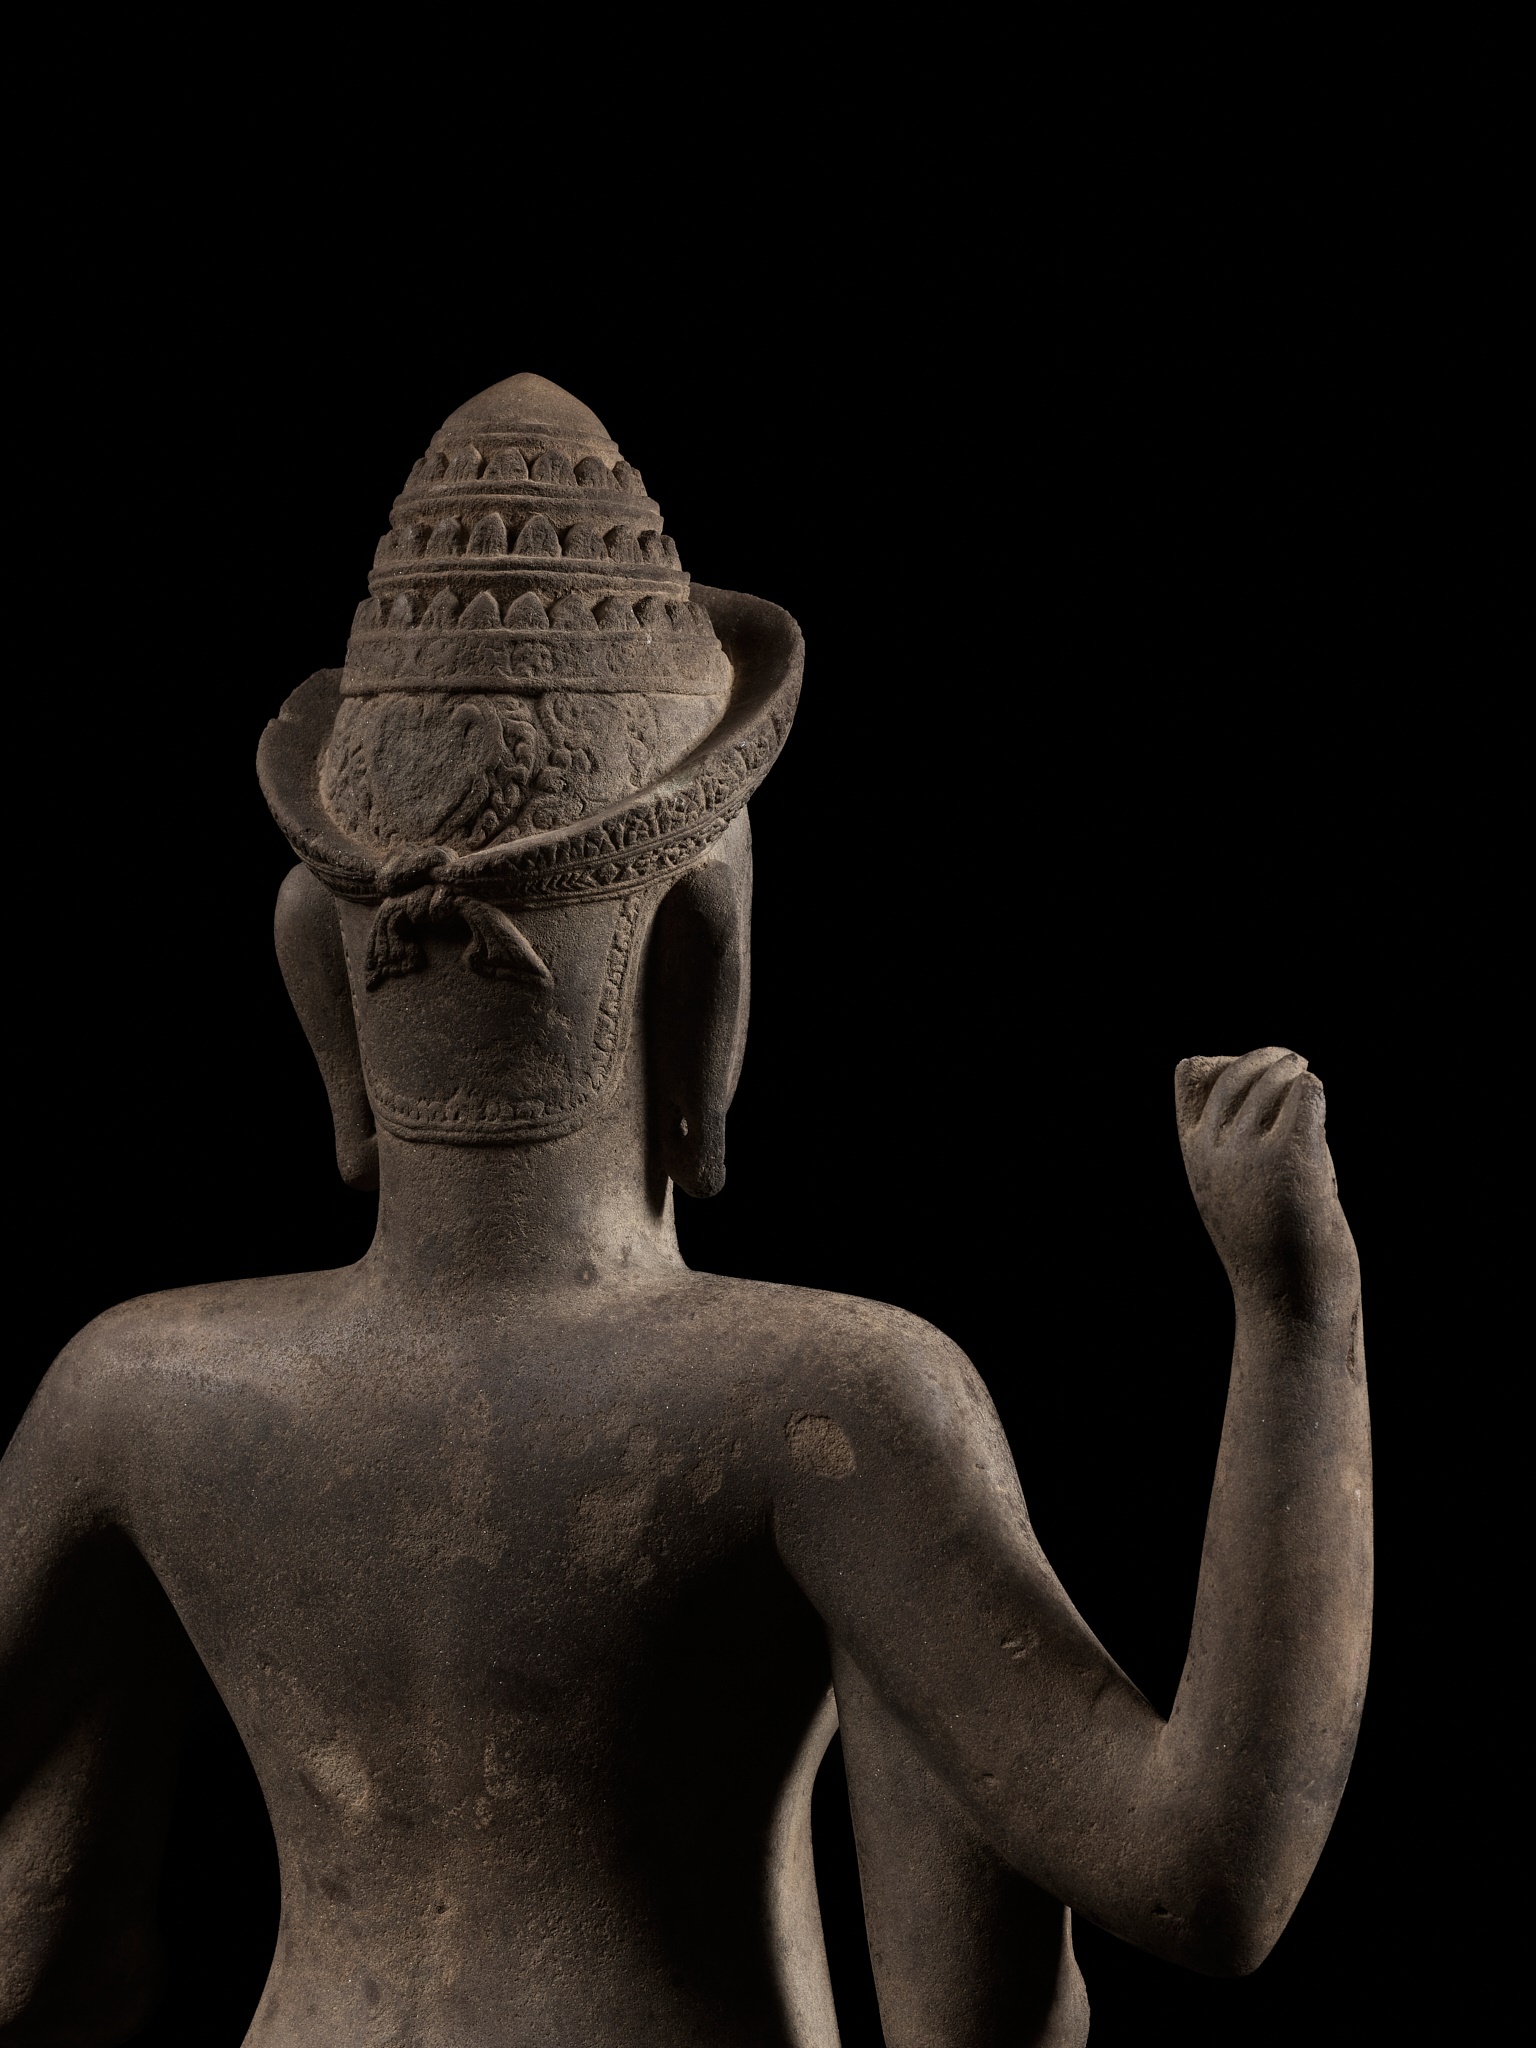 A KHMER SANDSTONE FIGURE OF A MALE DEITY, ANGKOR PERIOD - Image 8 of 13